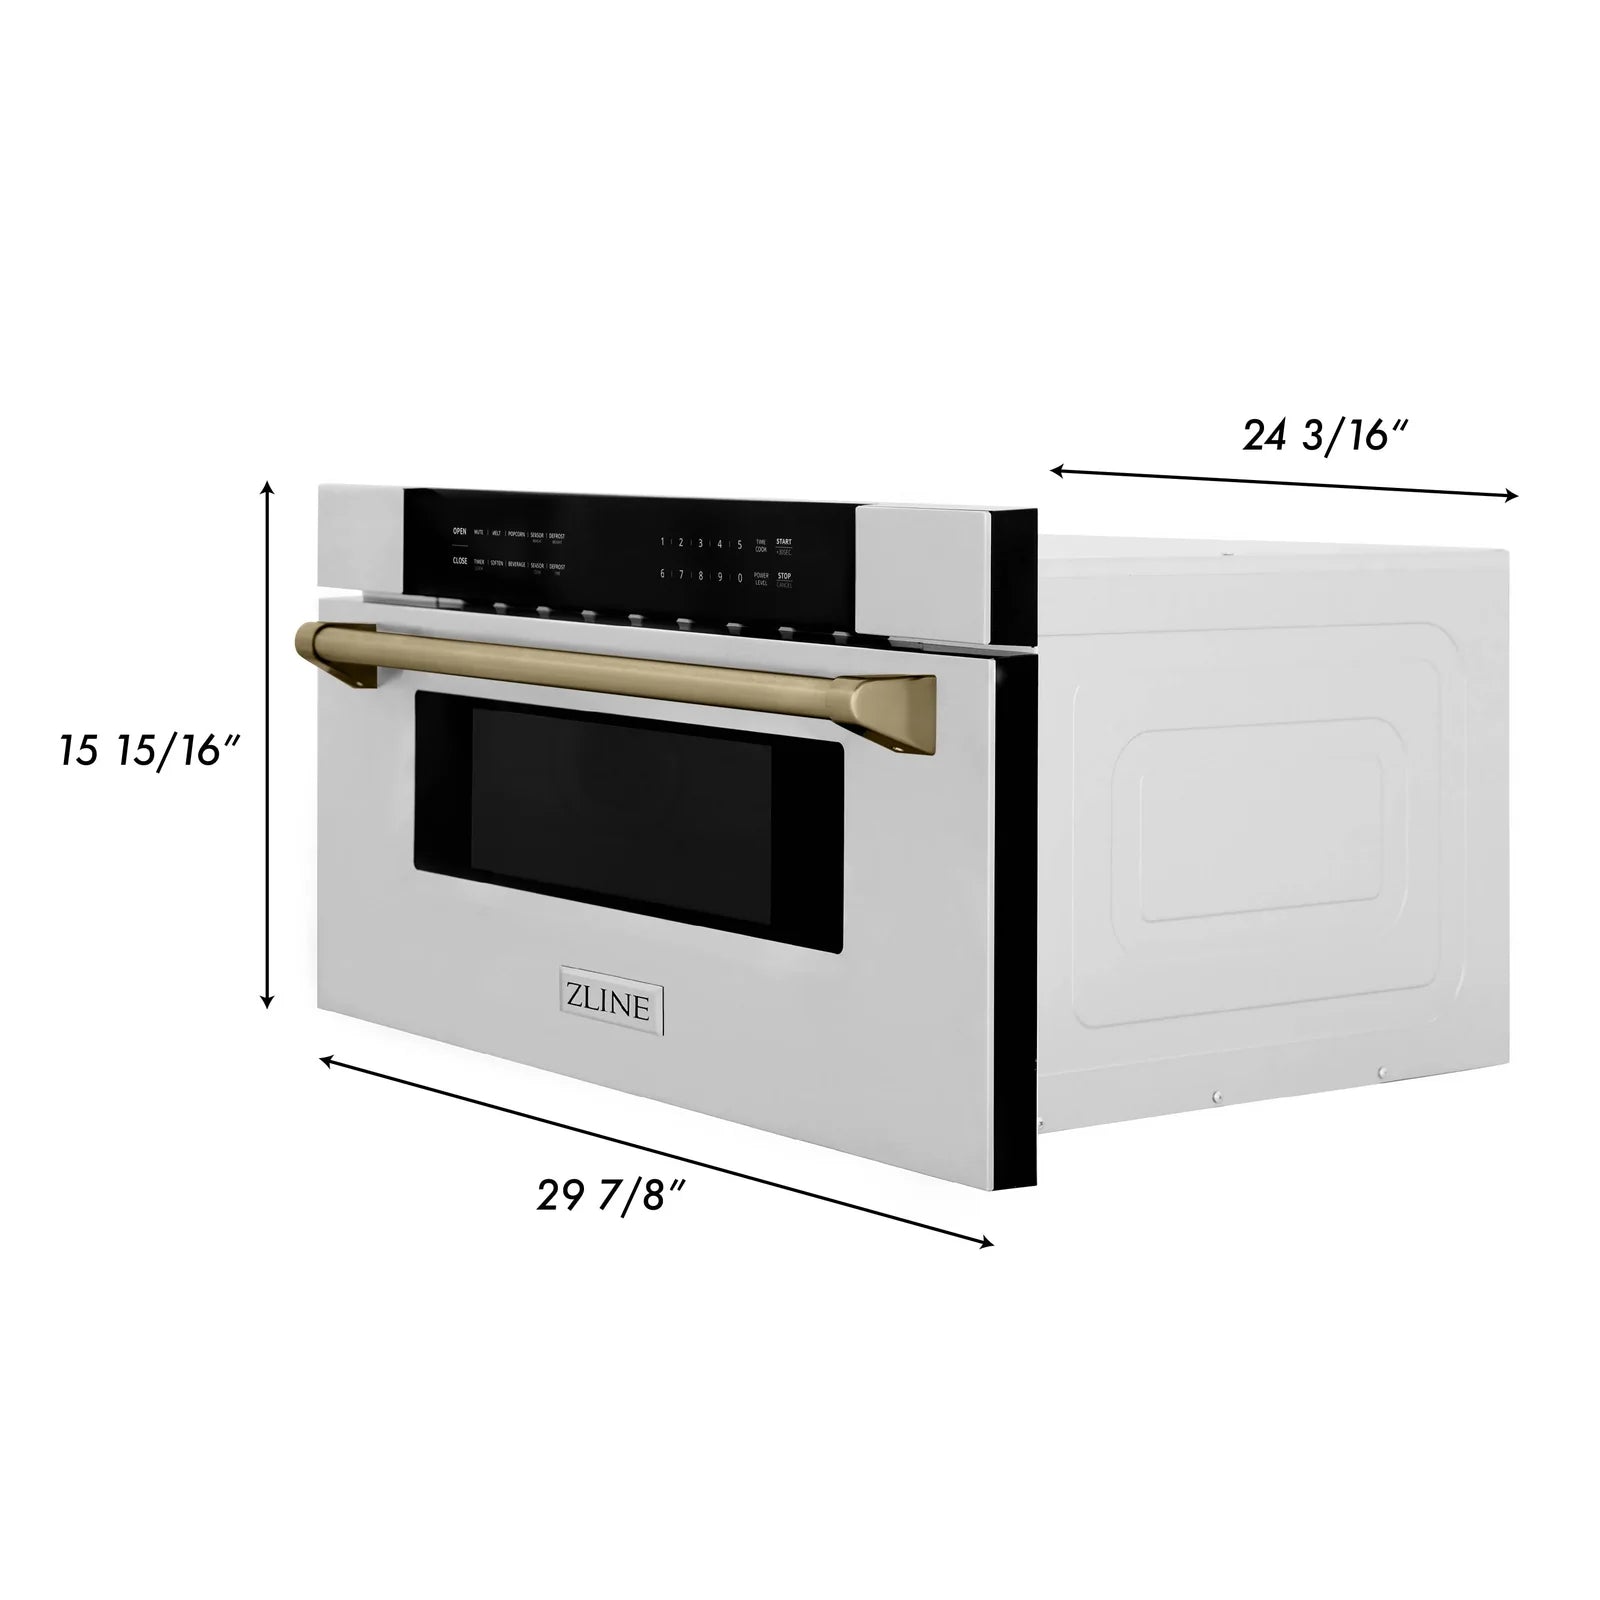 ZLINE Autograph 30 In. 1.2 cu. ft. Built-In Microwave Drawer In Stainless Steel With Champagne Bronze Accents, MWDZ-30-CB - Smart Kitchen Lab